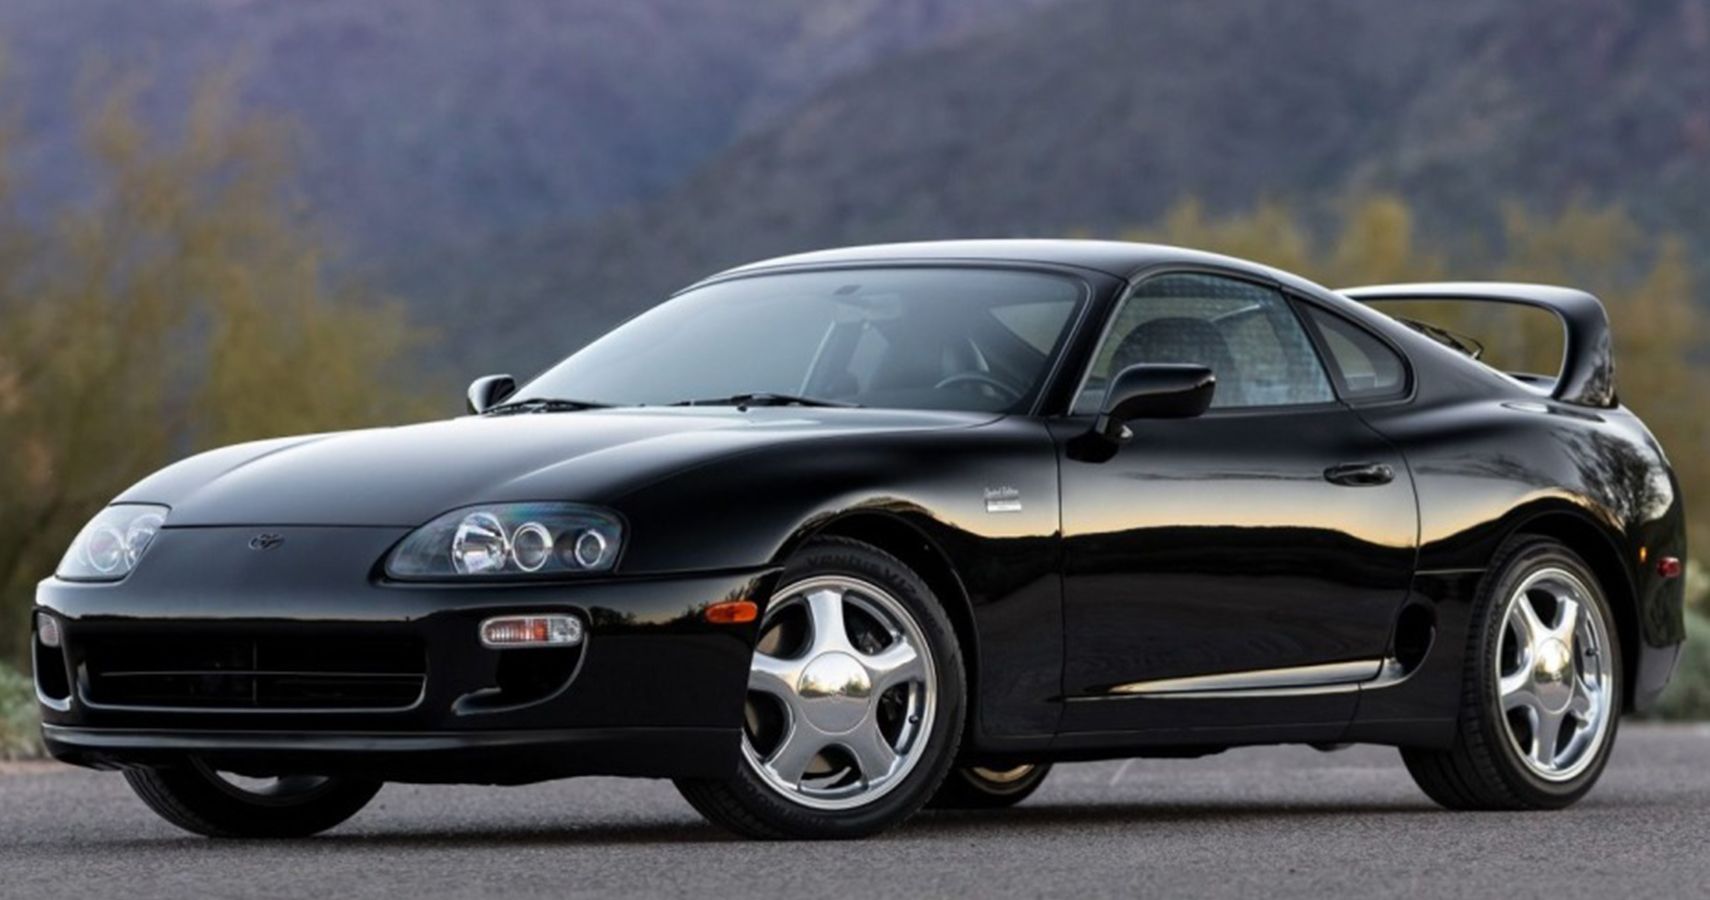 Toyota Supra MK4  Over Hyped or Legendary? 